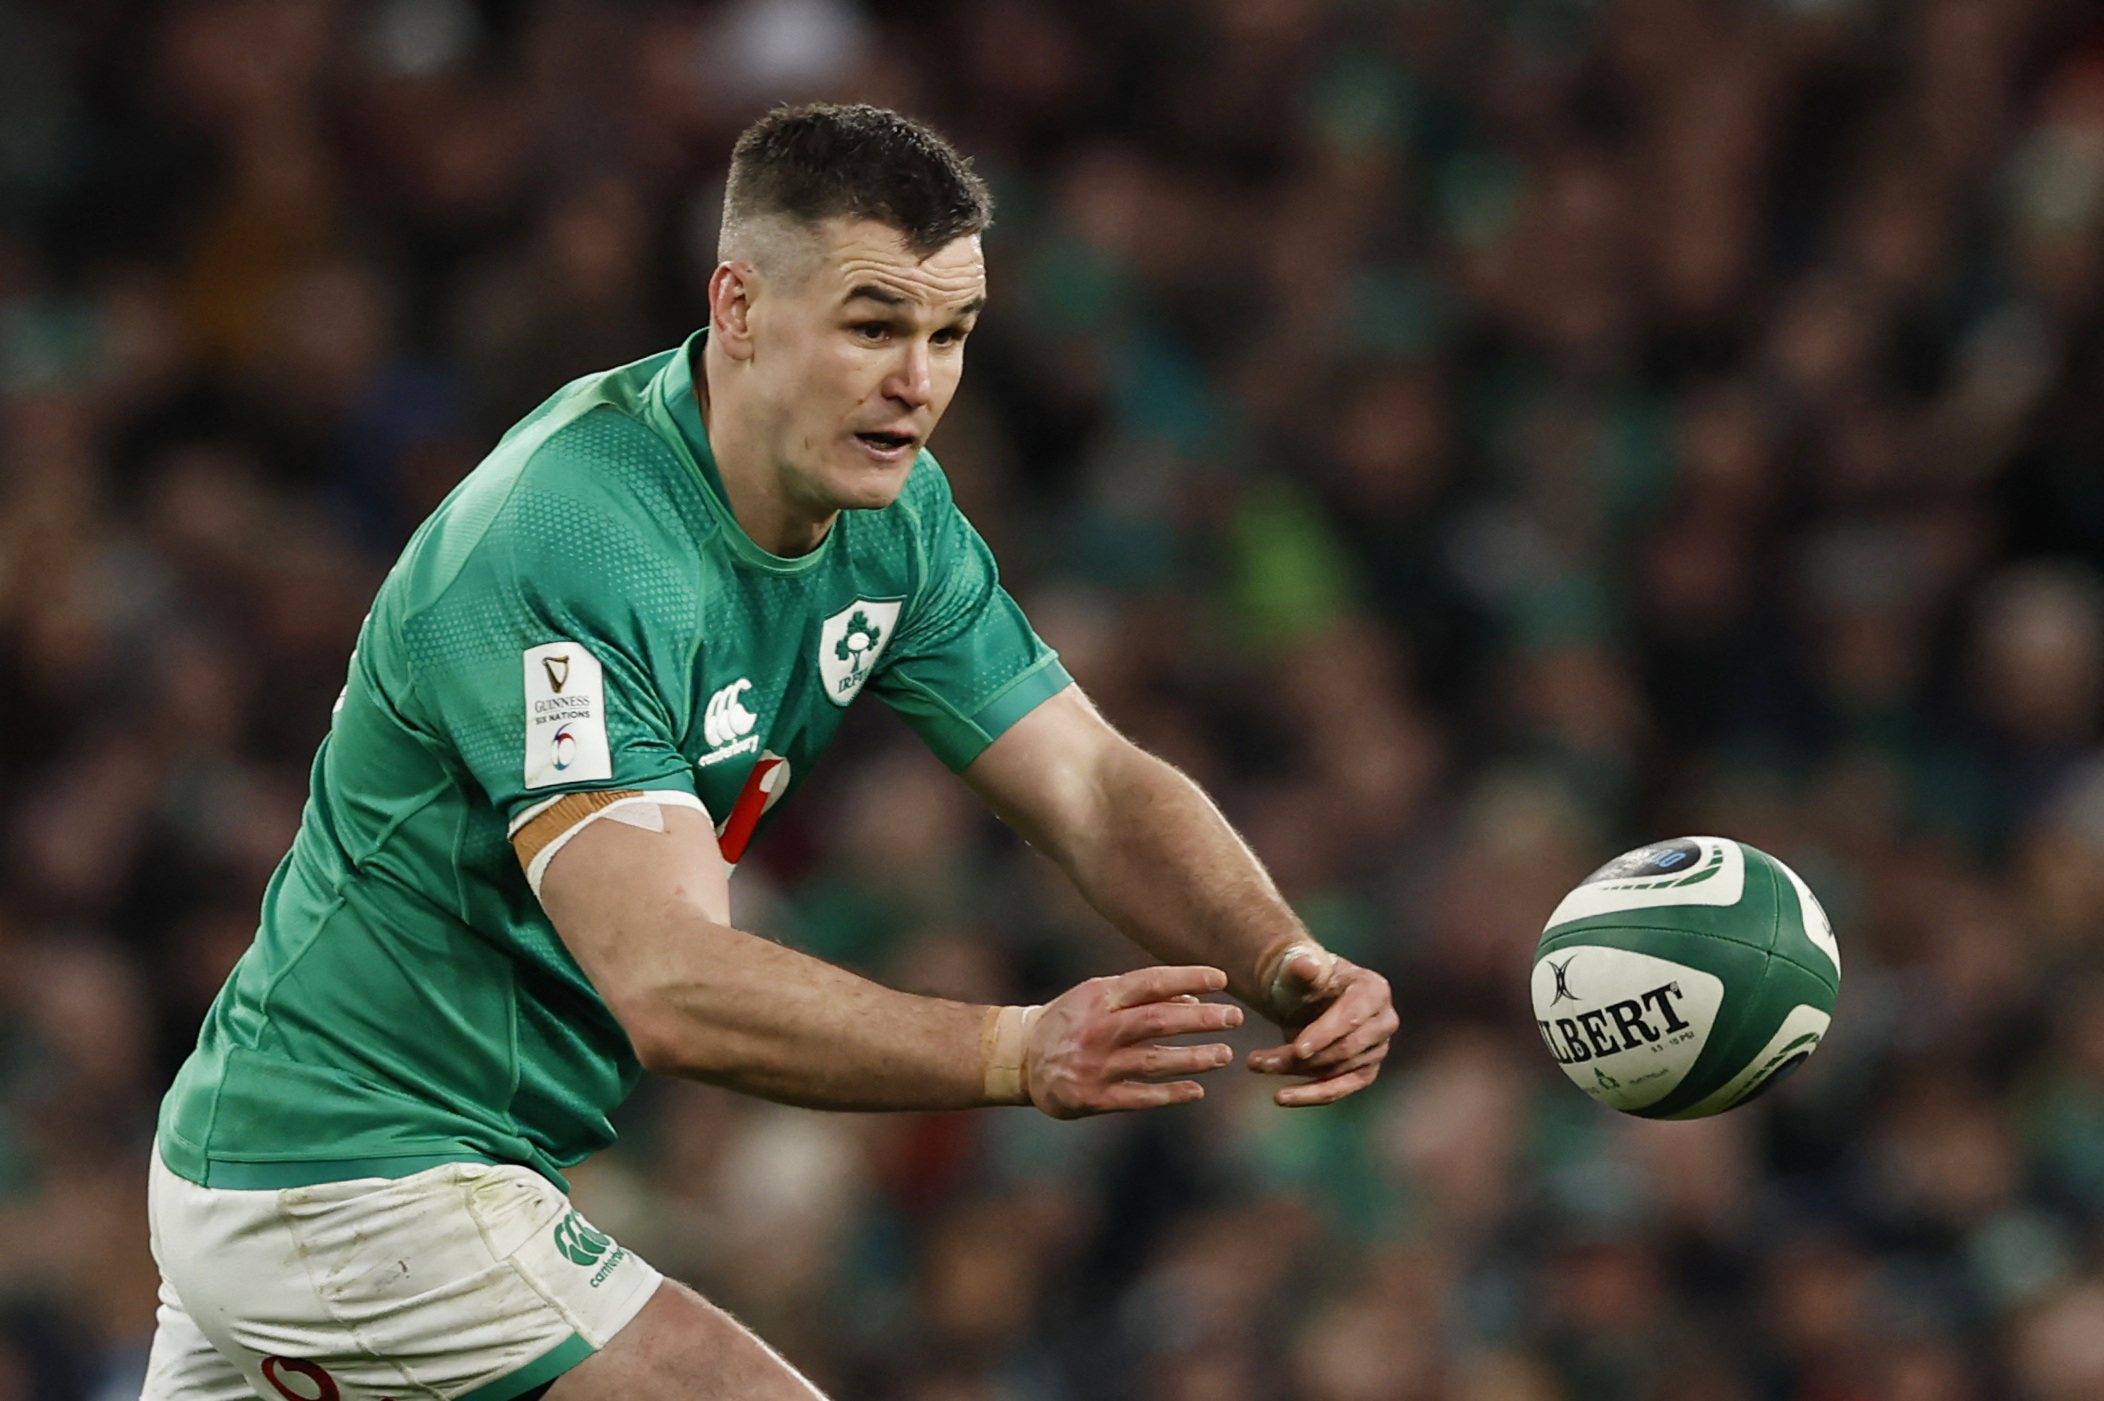 Ireland captain Sexton handed three-match suspension, cleared for World Cup Reuters